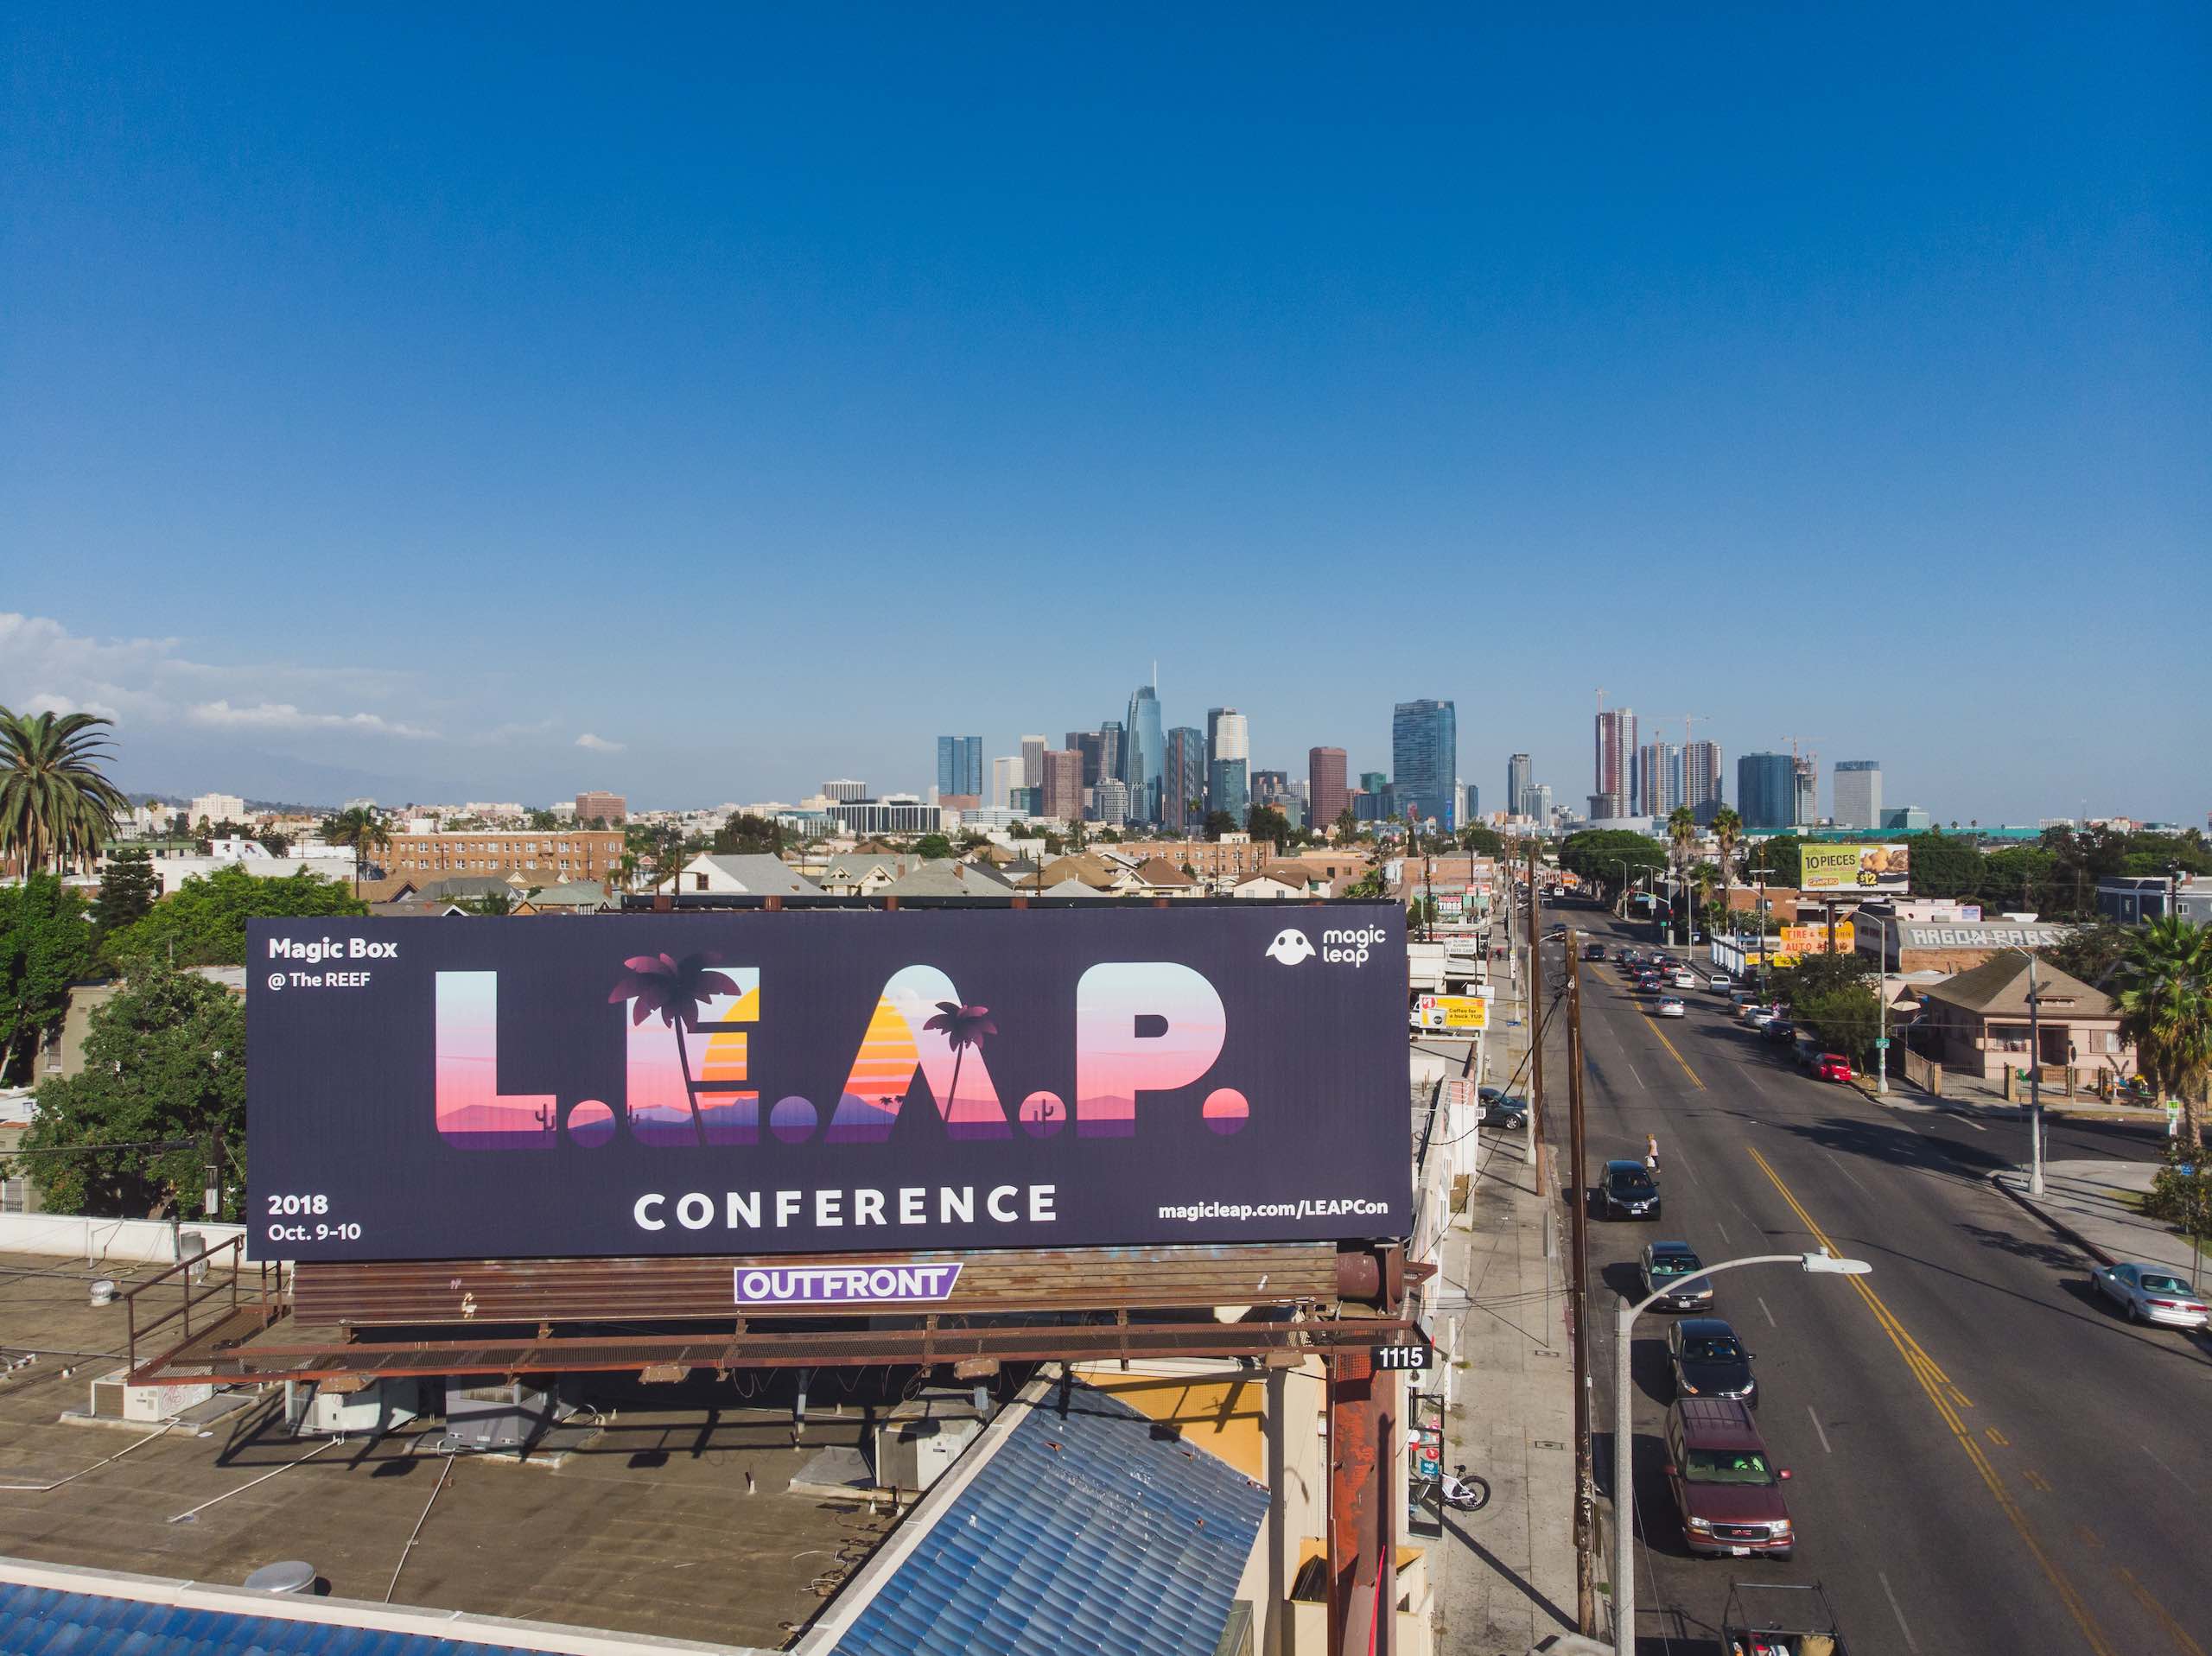 View from drone of LEAP Conference billboard on display near road with cars parked and driving by